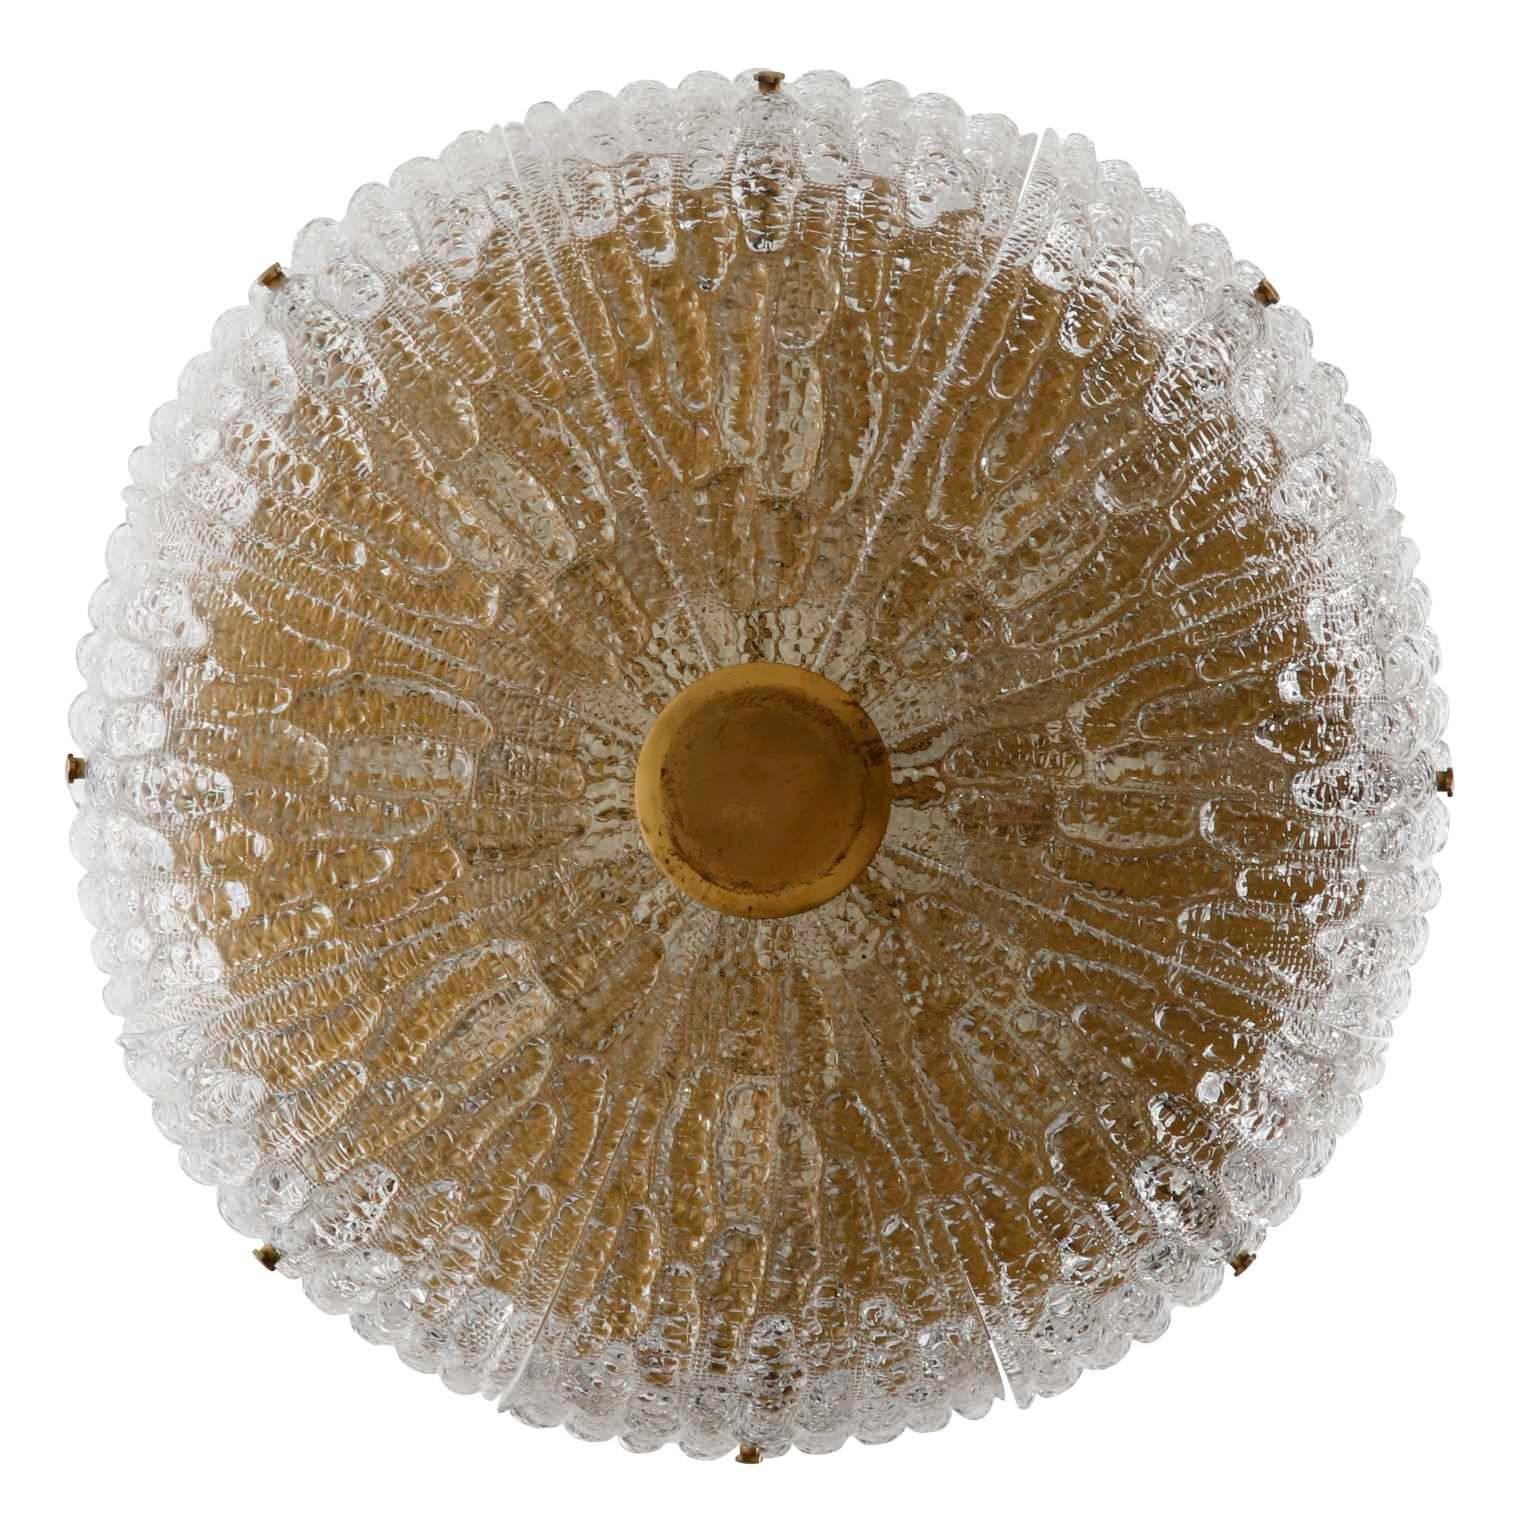 A large Swedish pressed glass and brass light fixture designed by Carl Fagerlund for Orrefors, manufactured in midcentury, circa 1960 (late 1950s-early 1960s).
Eight textured glass elements are mounted with brass bolts on a solid brass frame. There